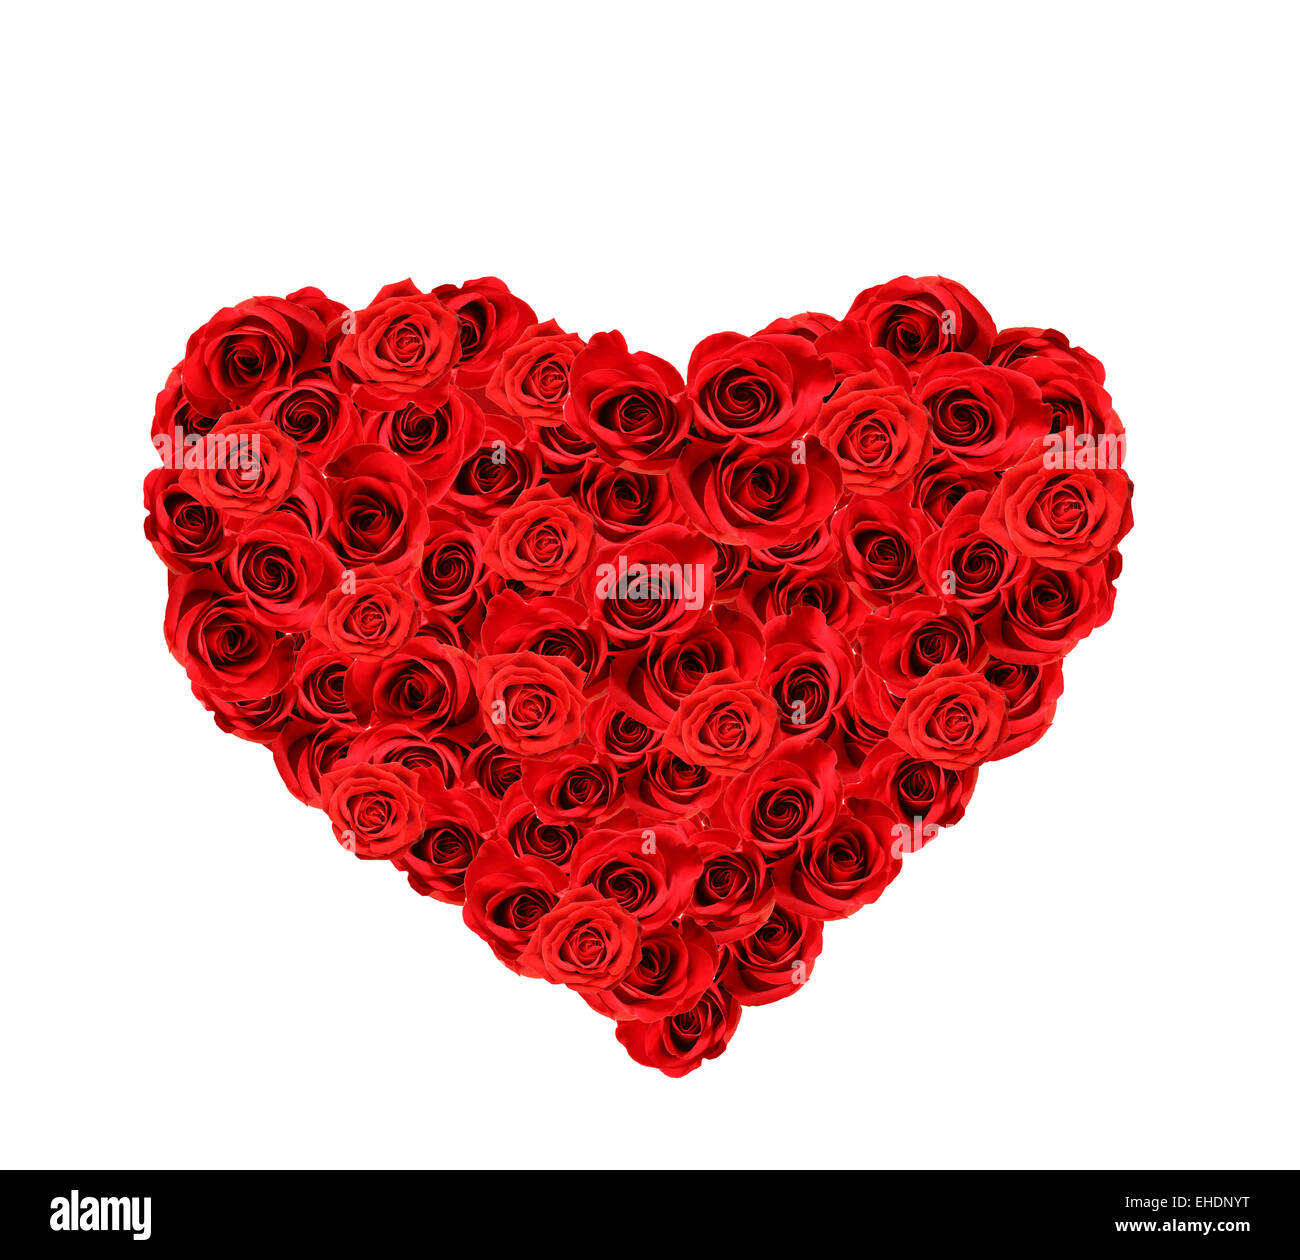 Red roses in the shape of a heart Stock Photo